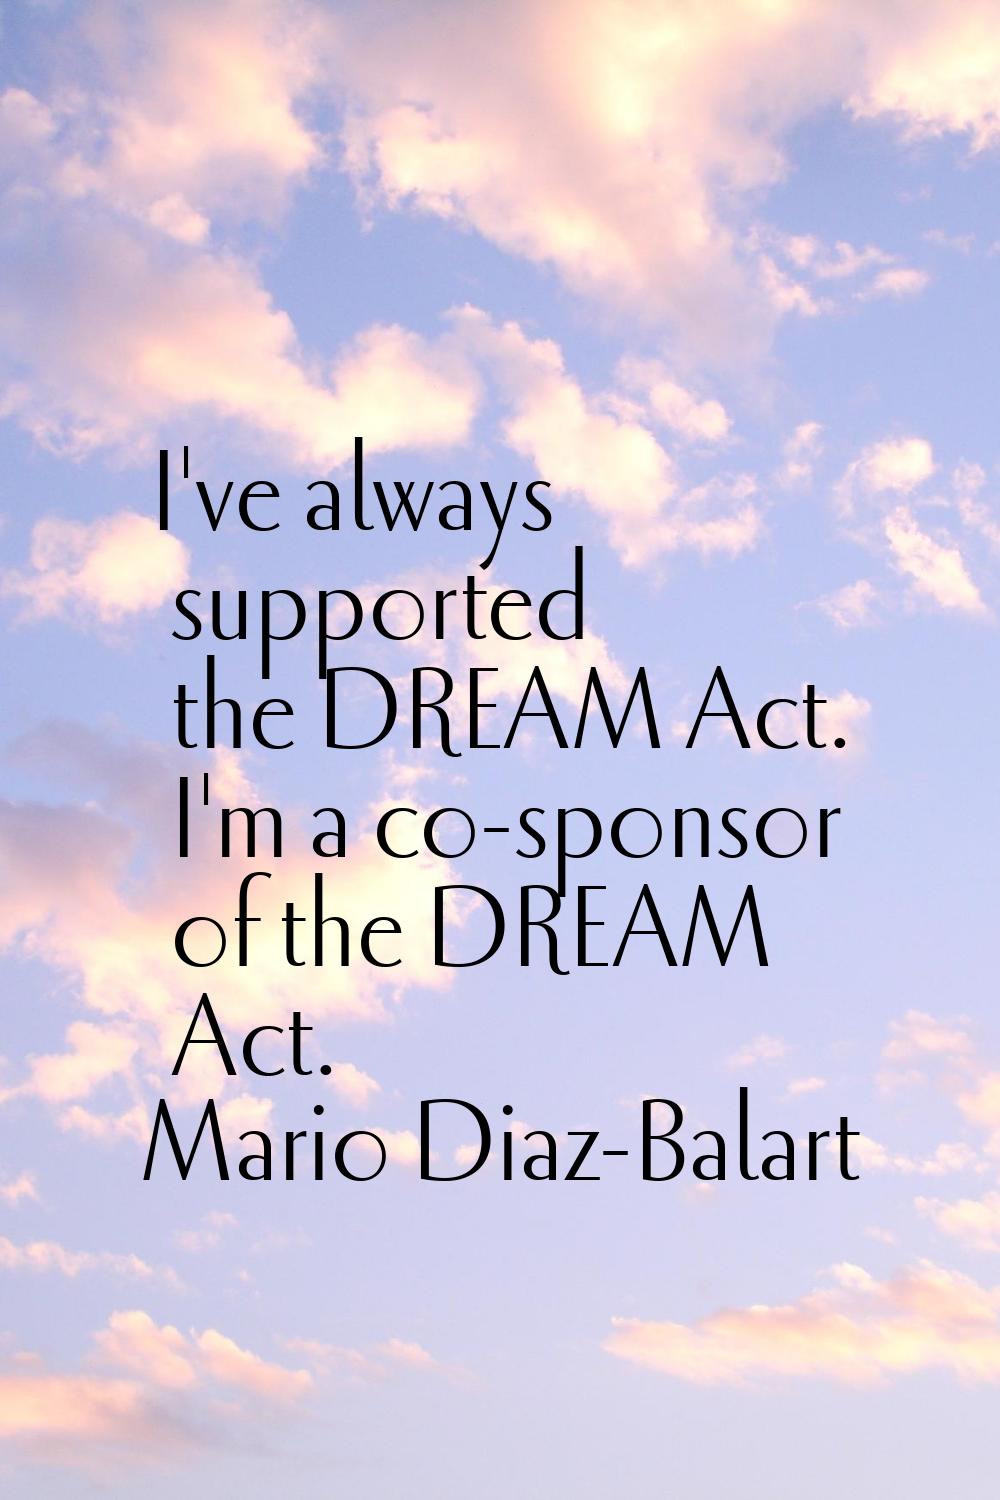 I've always supported the DREAM Act. I'm a co-sponsor of the DREAM Act.